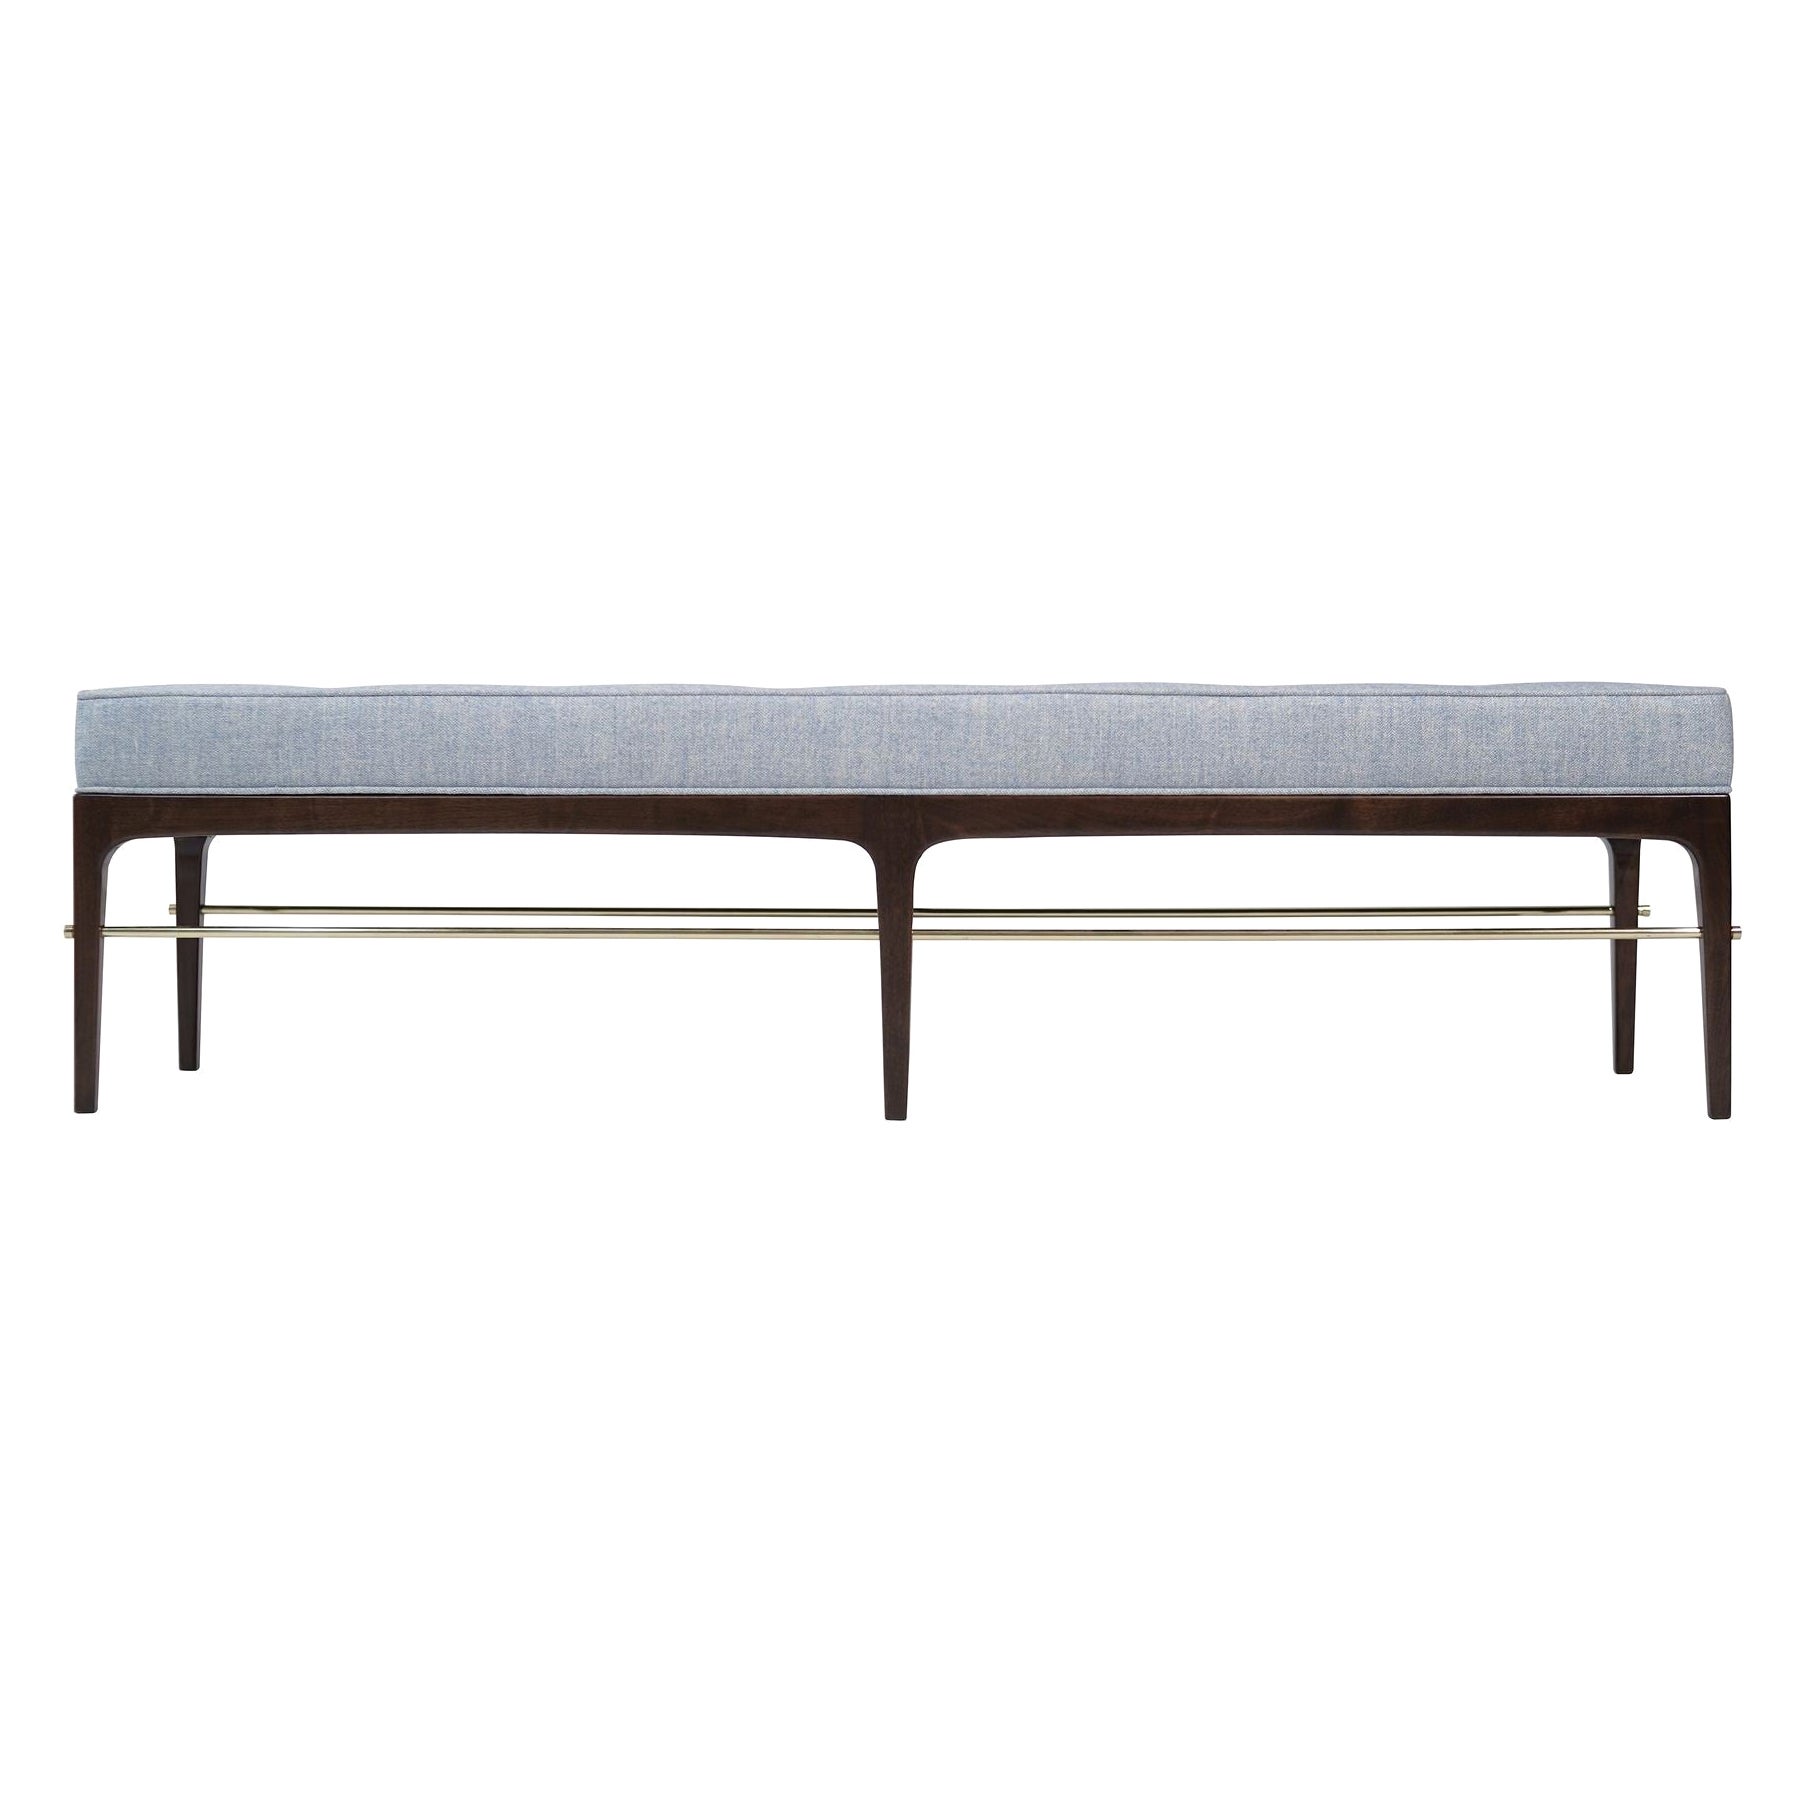 Linear Bench in Dark Walnut and Brass Series 72 by Stamford Modern For Sale